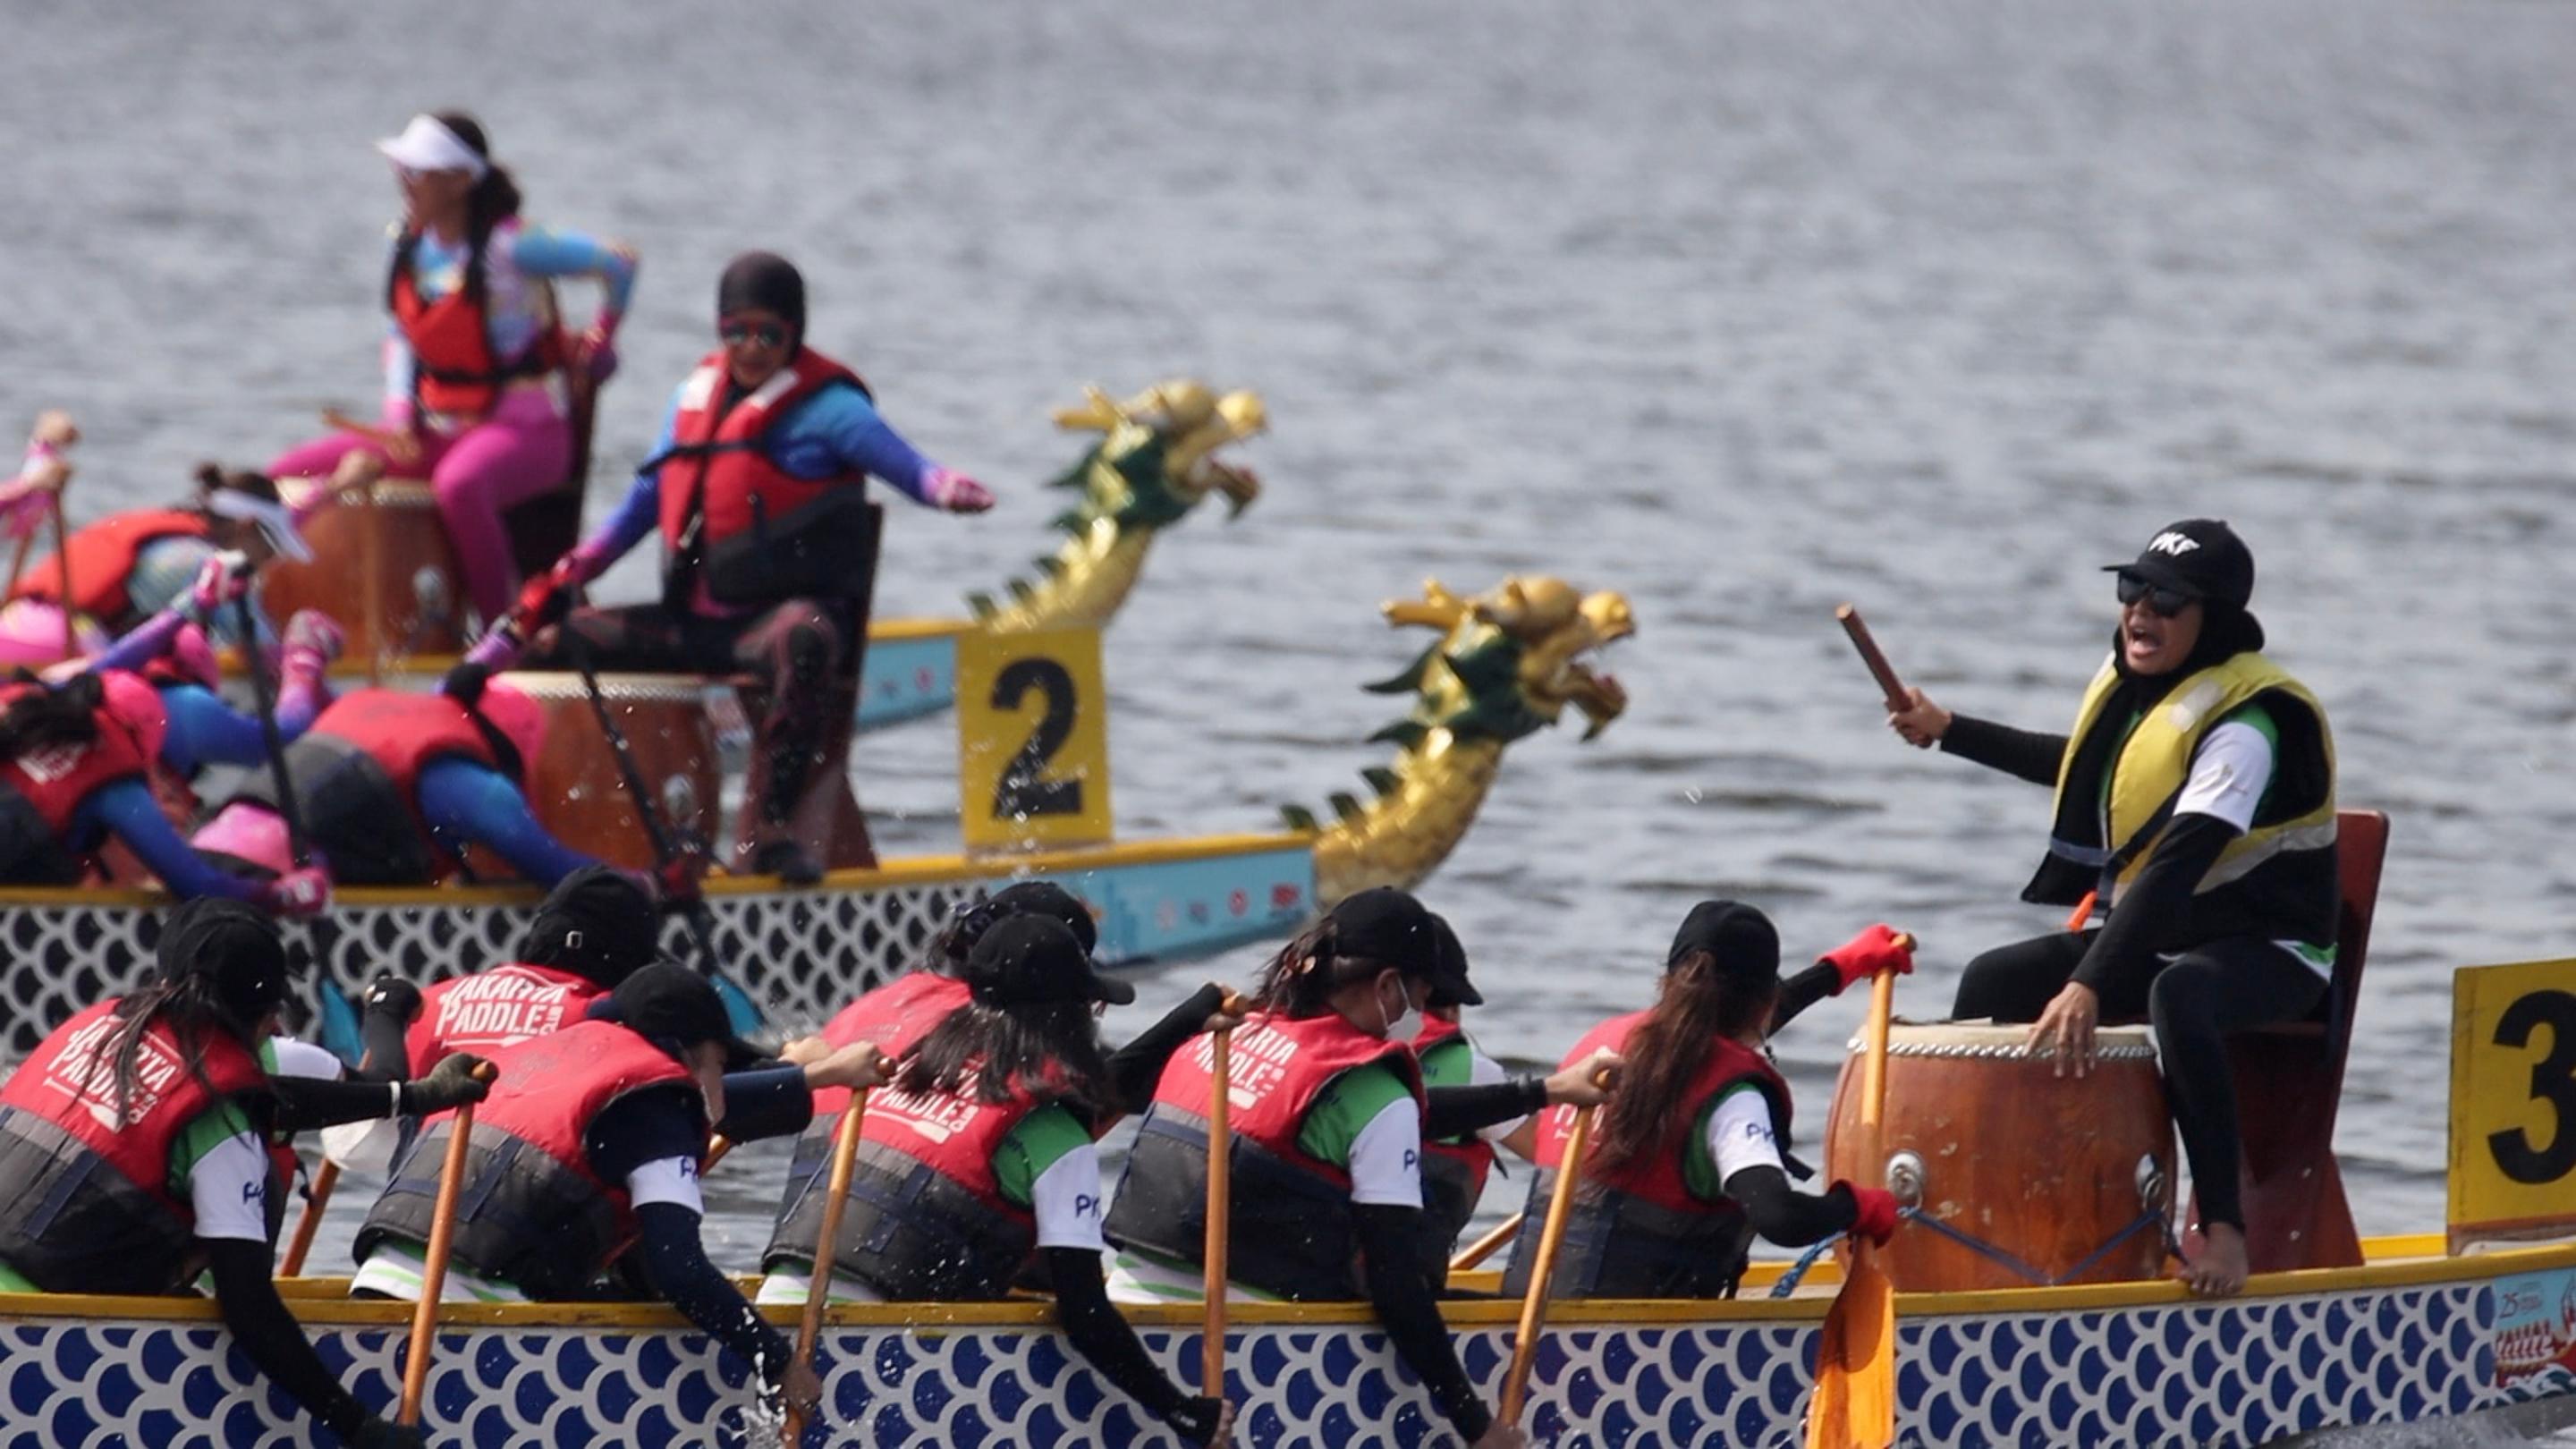 The Jakarta Dragon Boat Festival 2022 was held in Jakarta, Indonesia, today (August 13) to celebrate the 25th anniversary of the establishment of the Hong Kong Special Administrative Region. Photo shows local dragon boat teams taking part in the competition to race for the championship.

